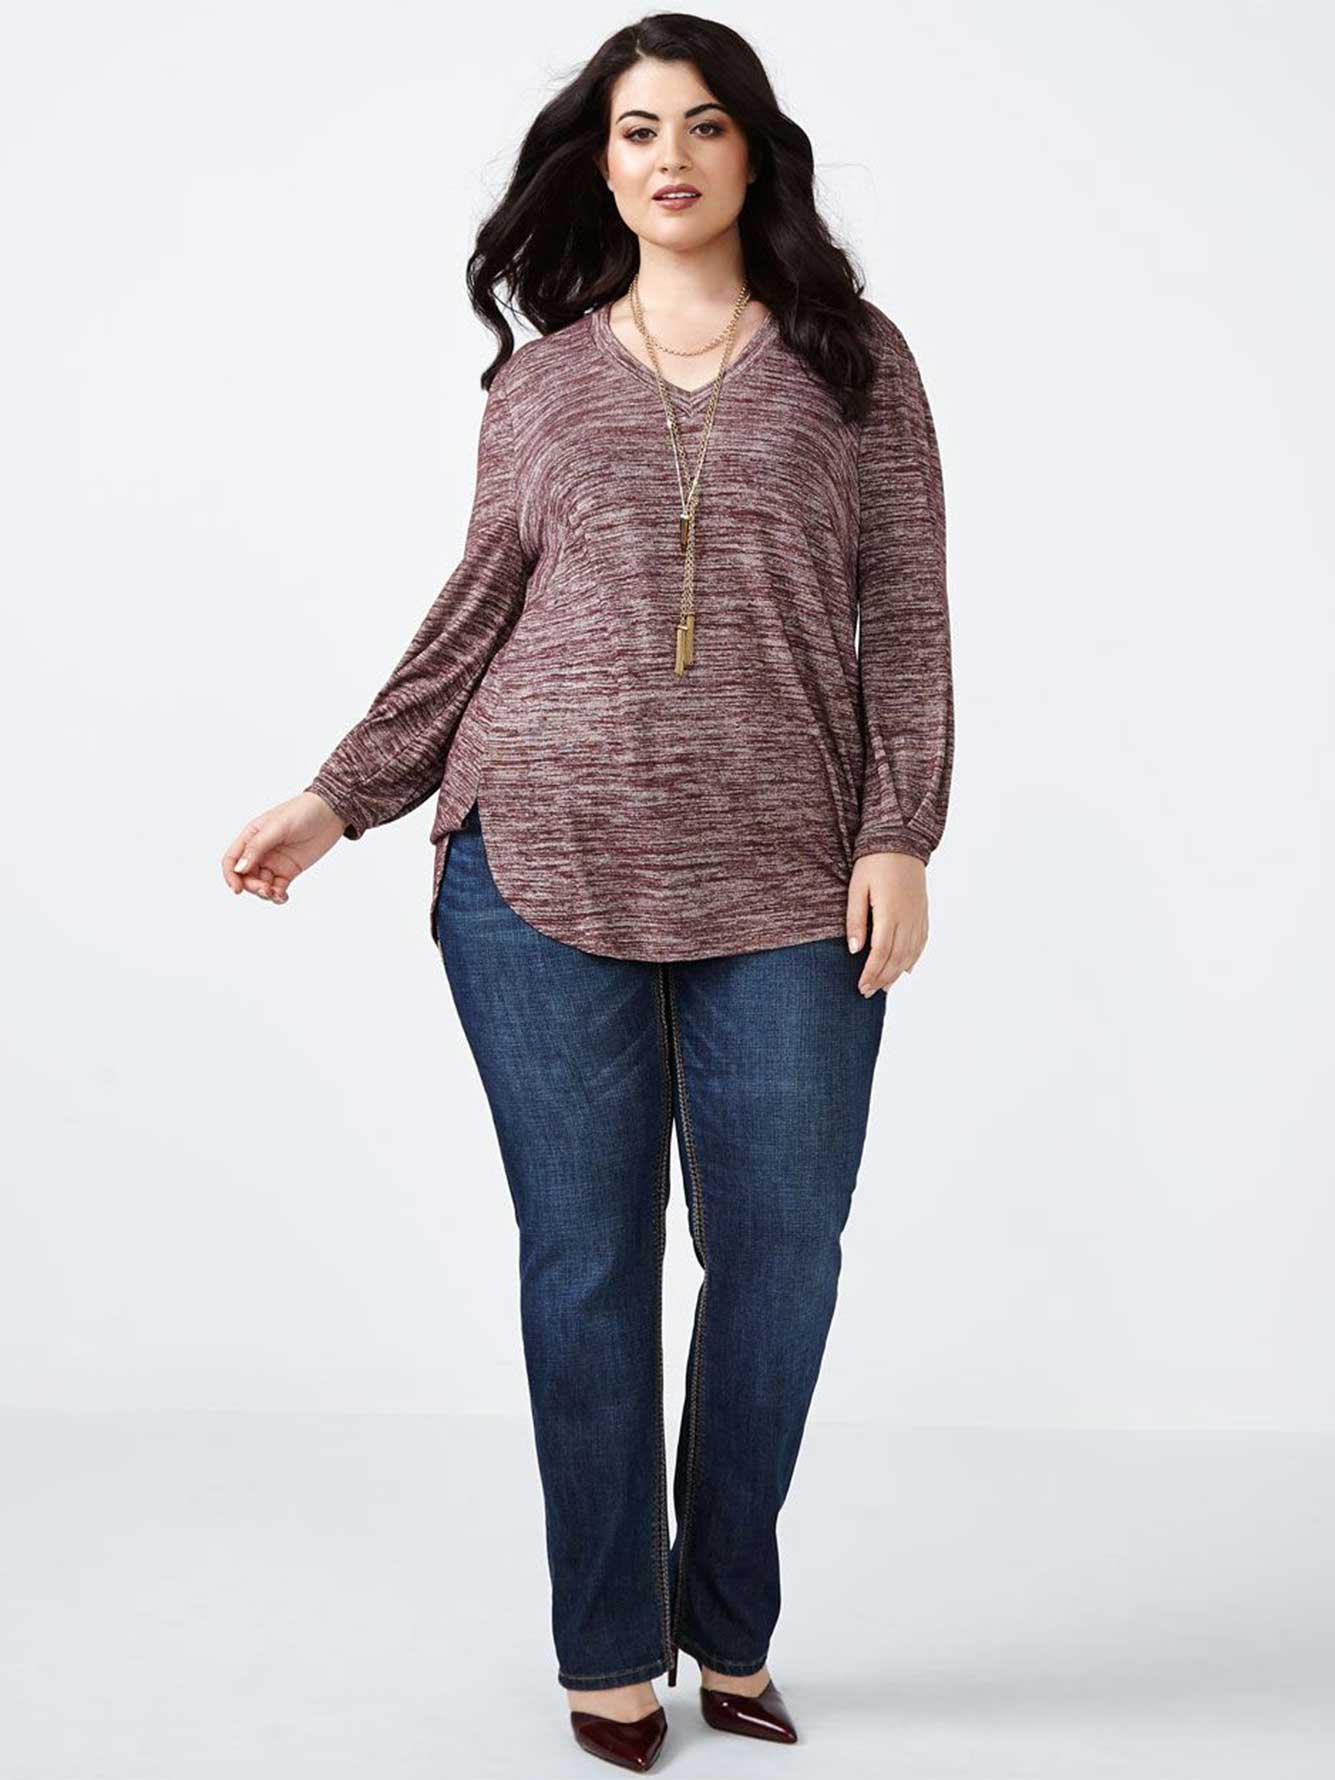 MELISSA McCARTHY Two-Toned Knit Top | Penningtons